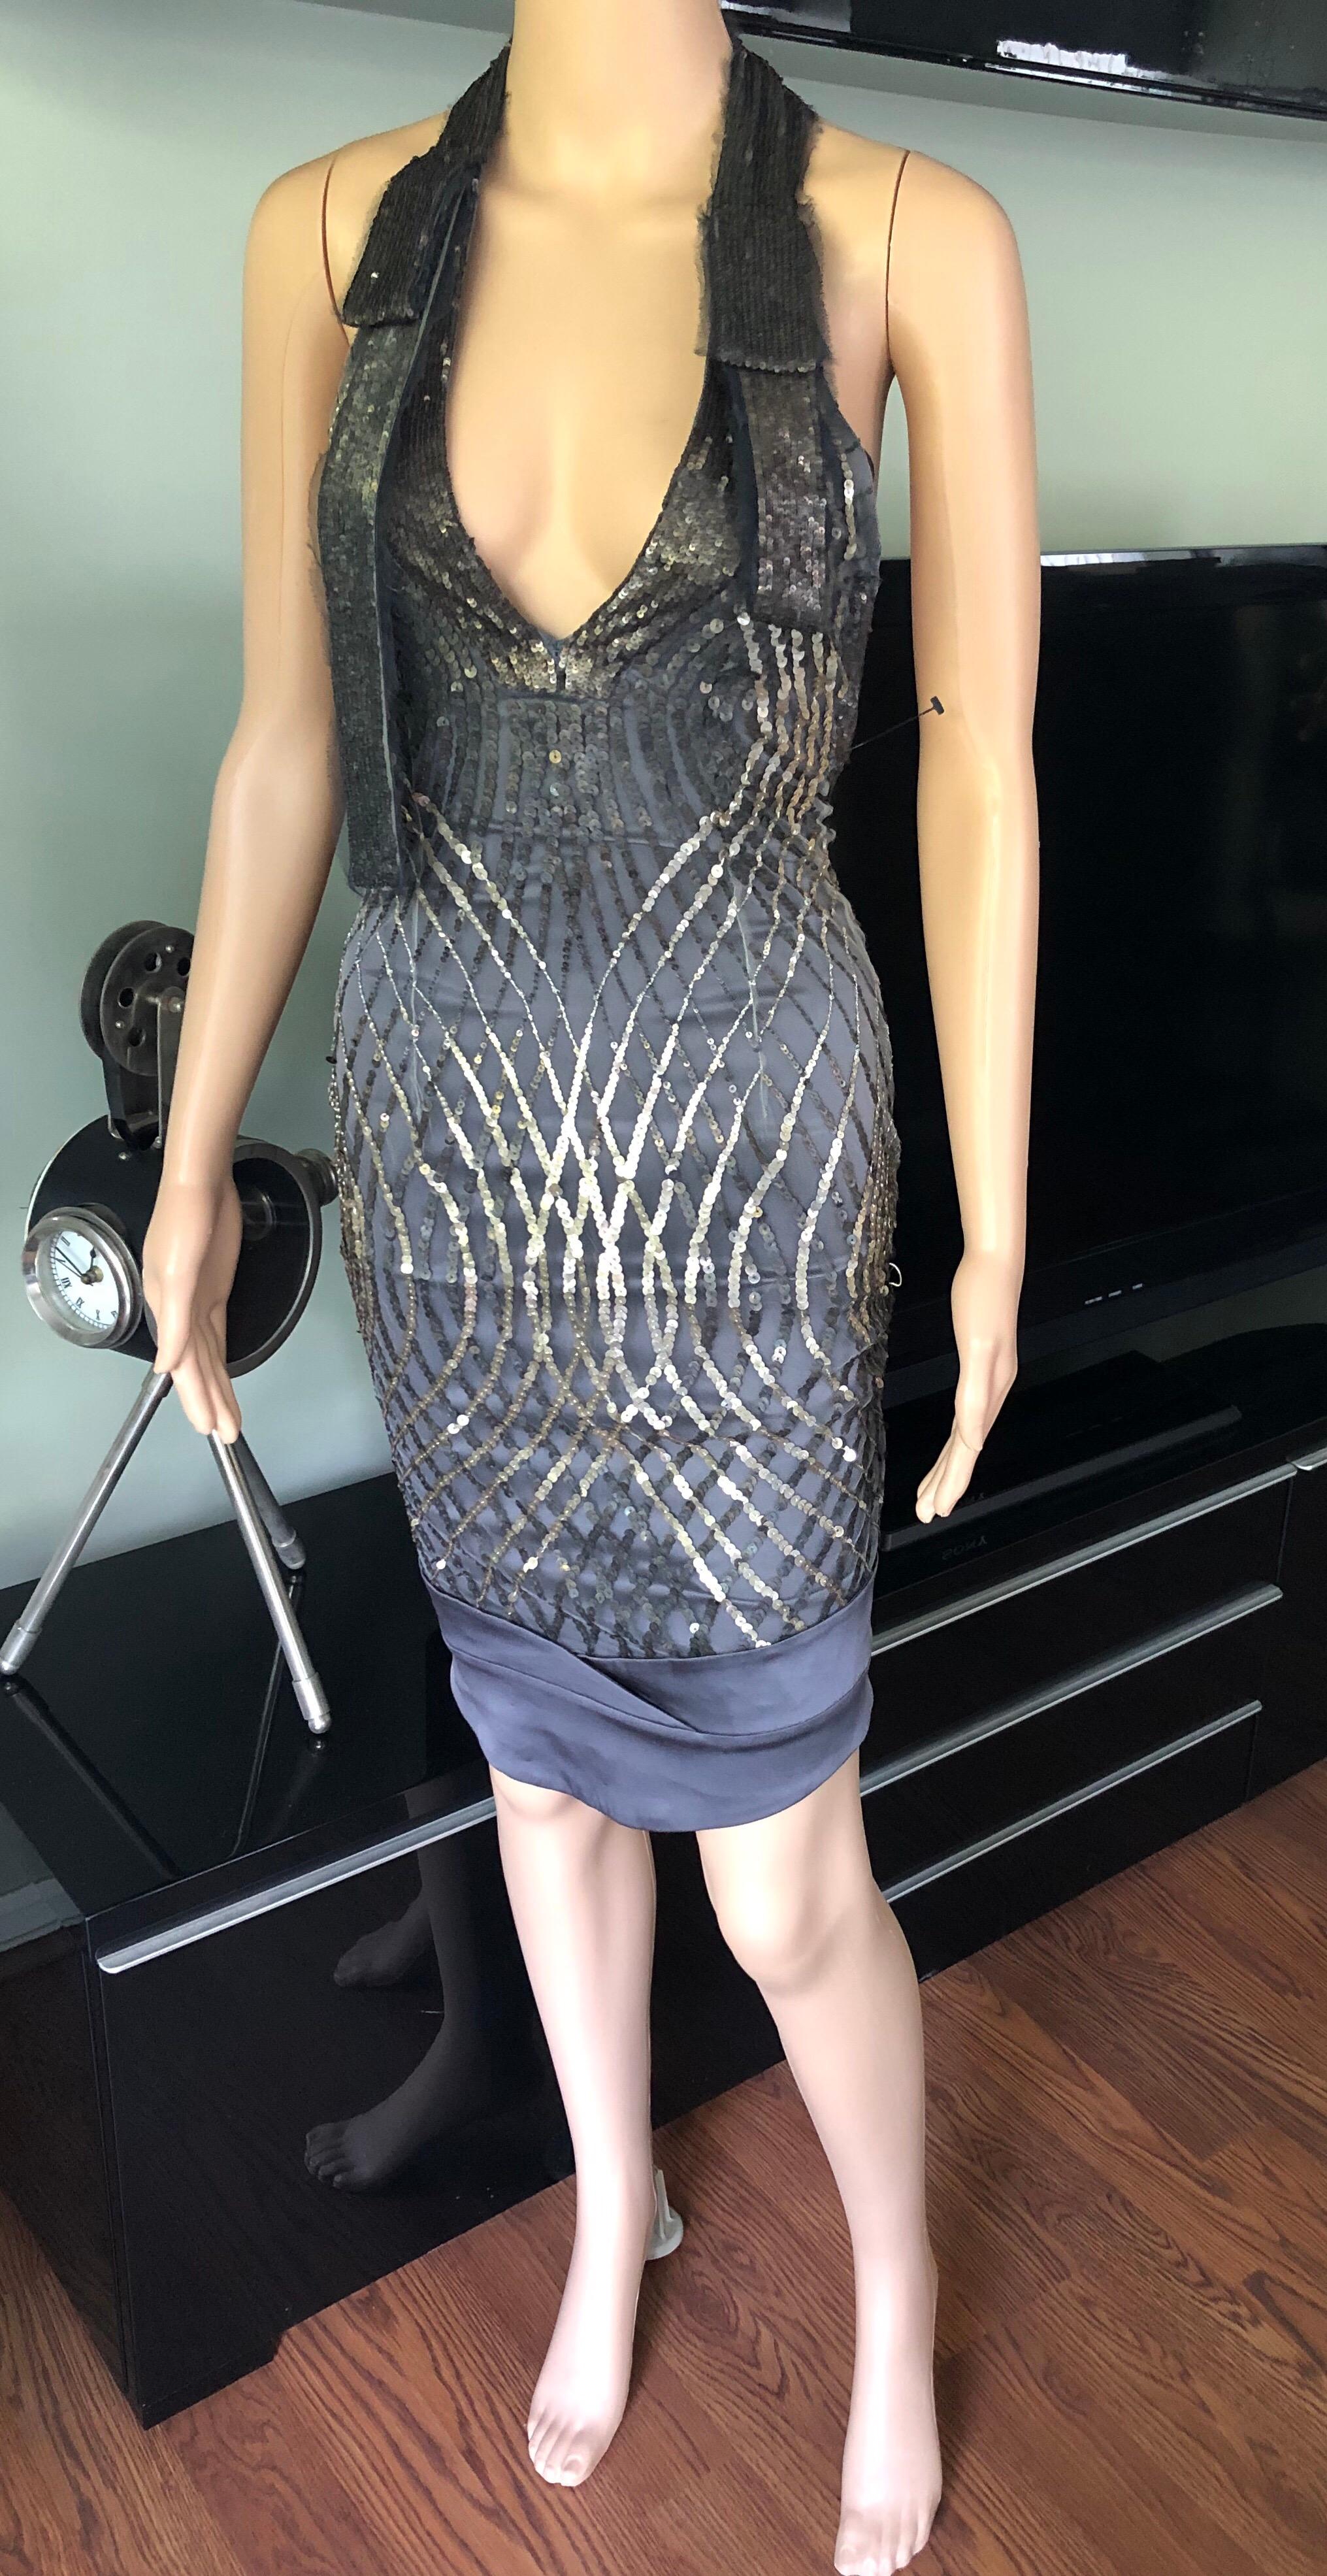 Gucci F/W 2005 Plunged Backless Silk Sequin Embellished Halter Dress XS/S

Gucci silk dress featuring sequin embellishments throughout, plunged halter neckline and concealed zip closure at back. Please note size tag has been removed. Please see